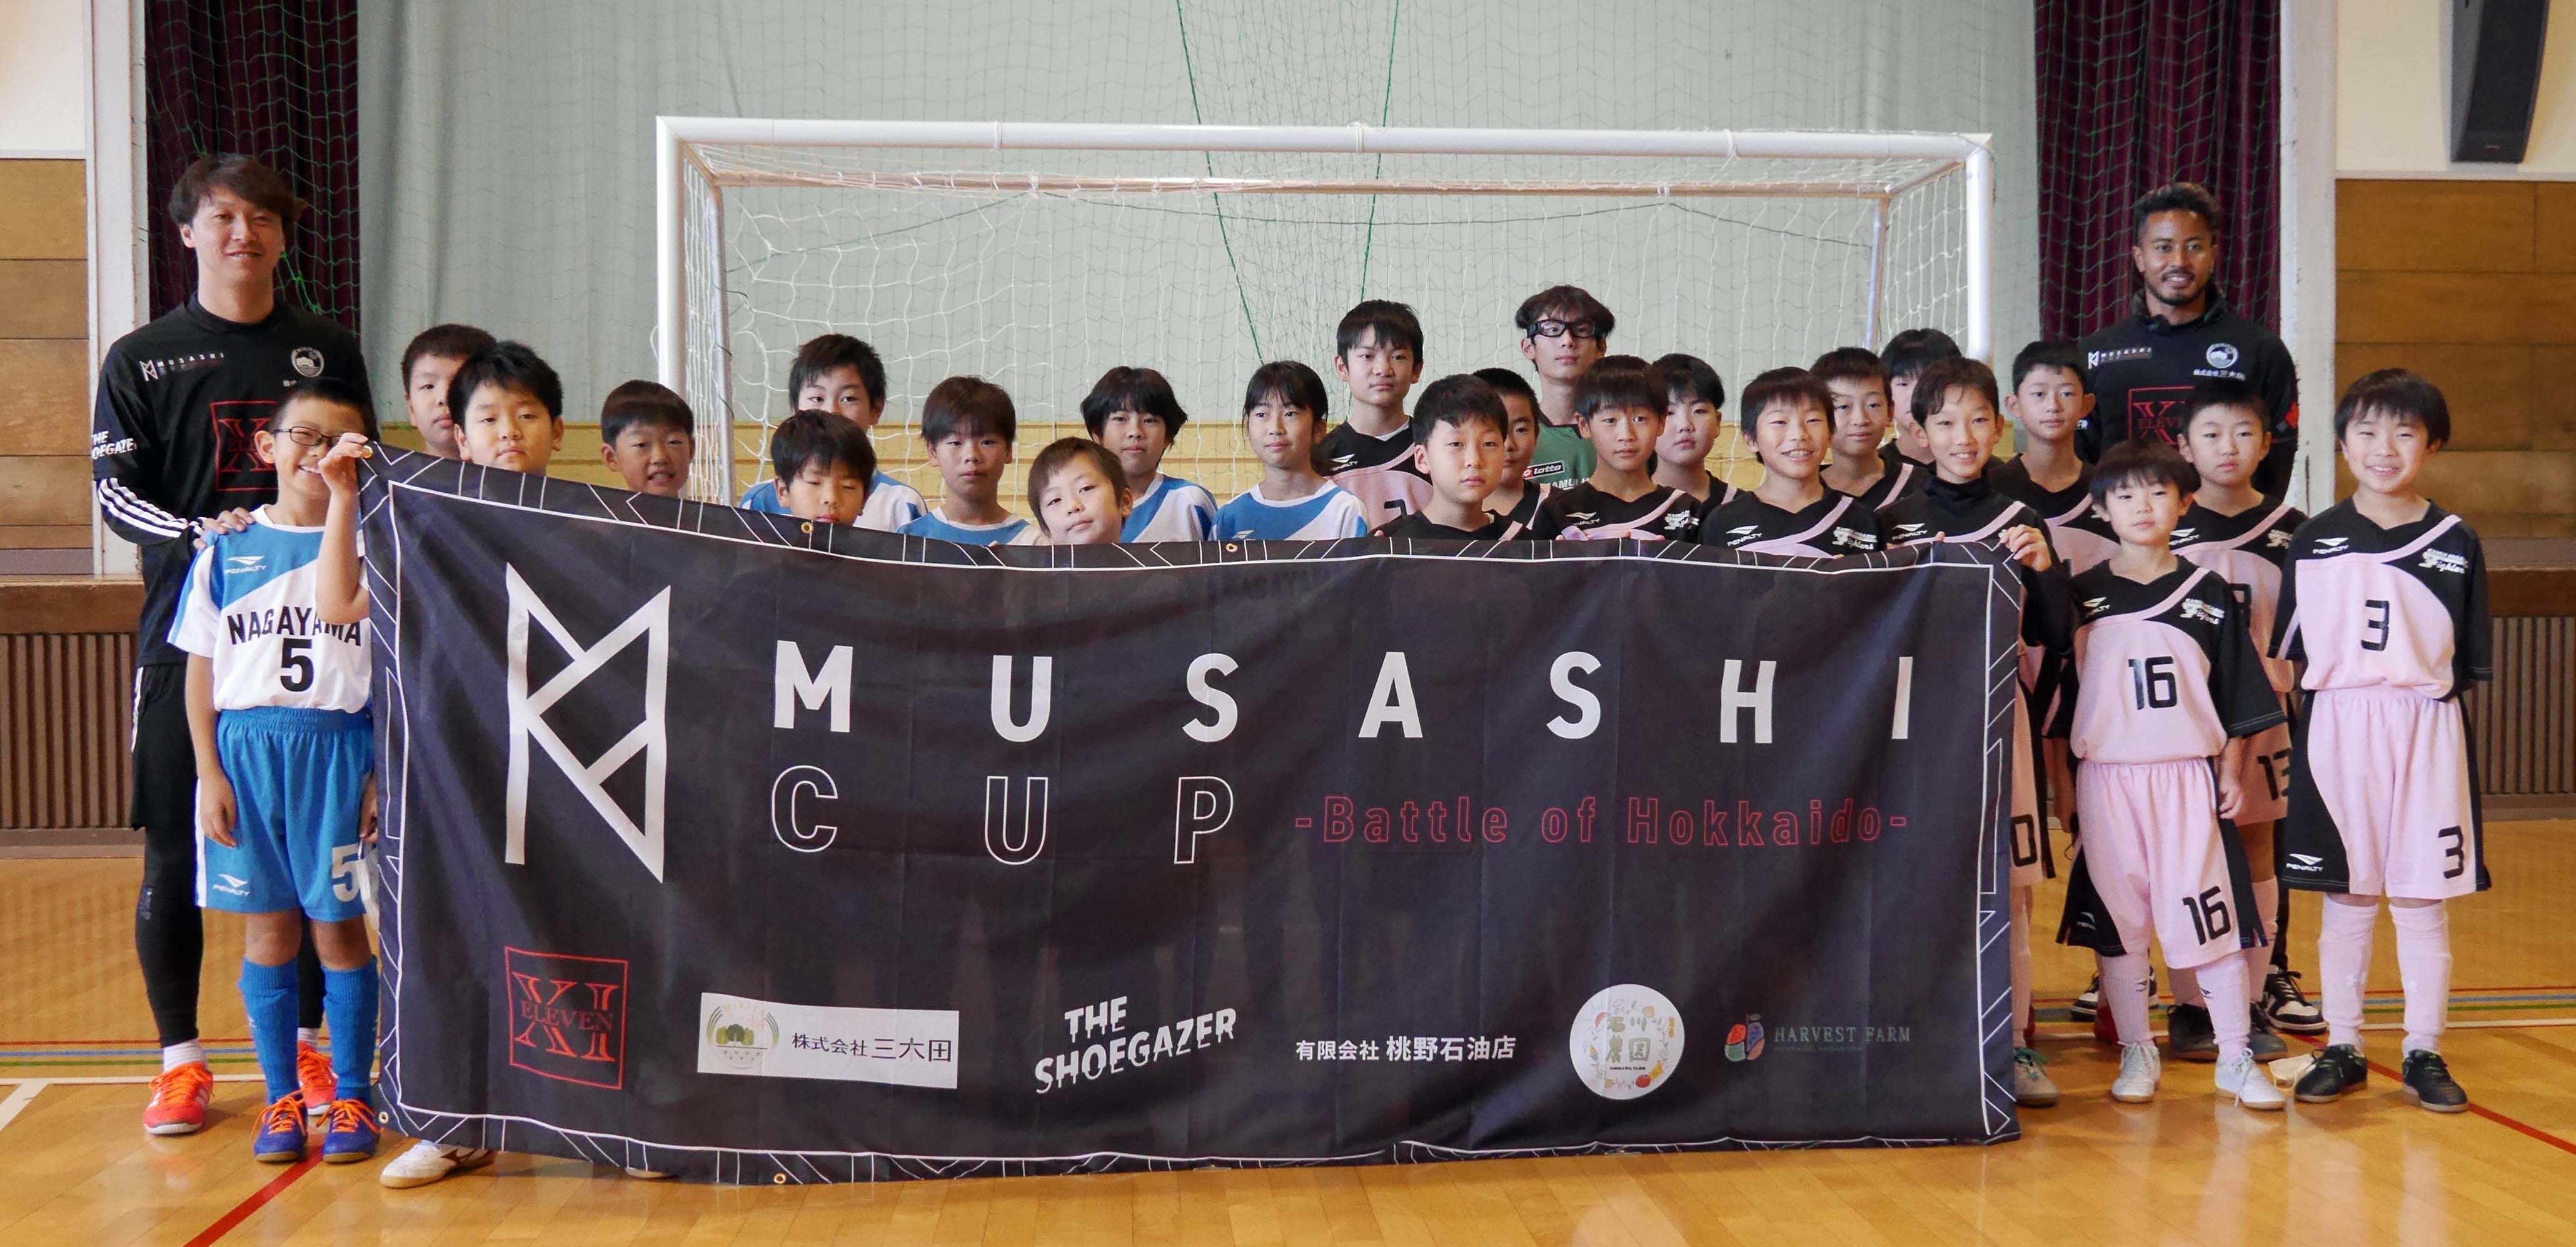 20221126_MUSASHICUP14-01